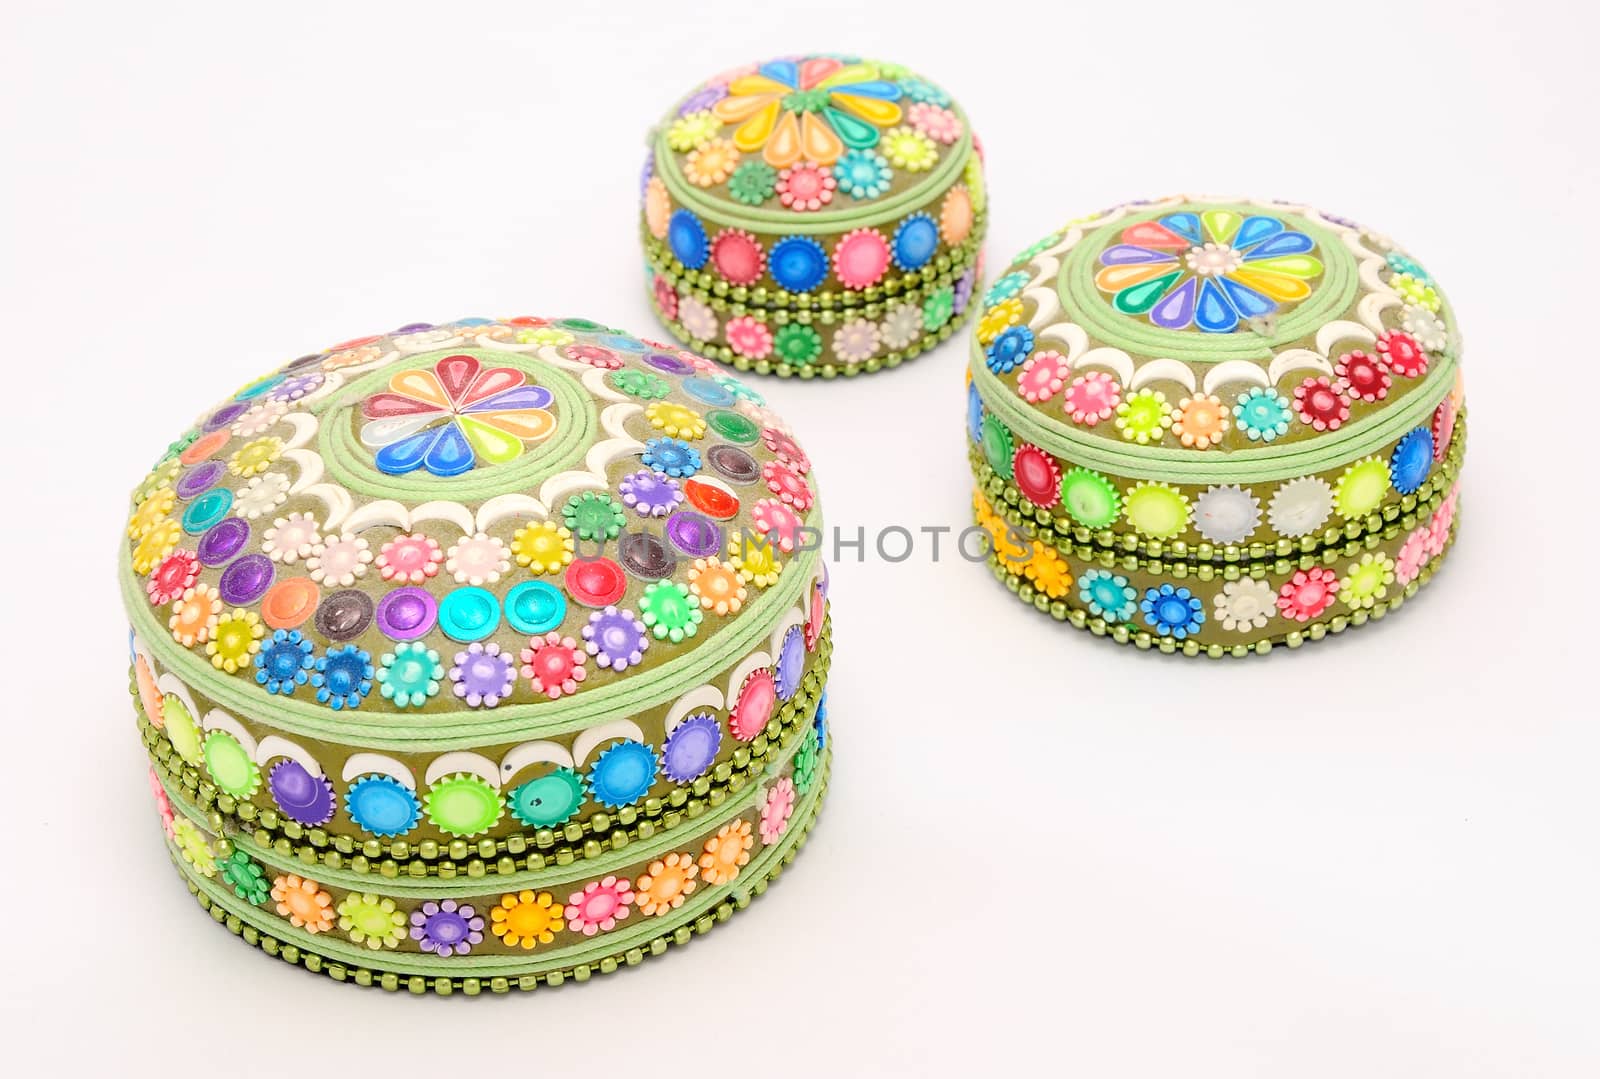 Detail image of decoration jewel boxes.